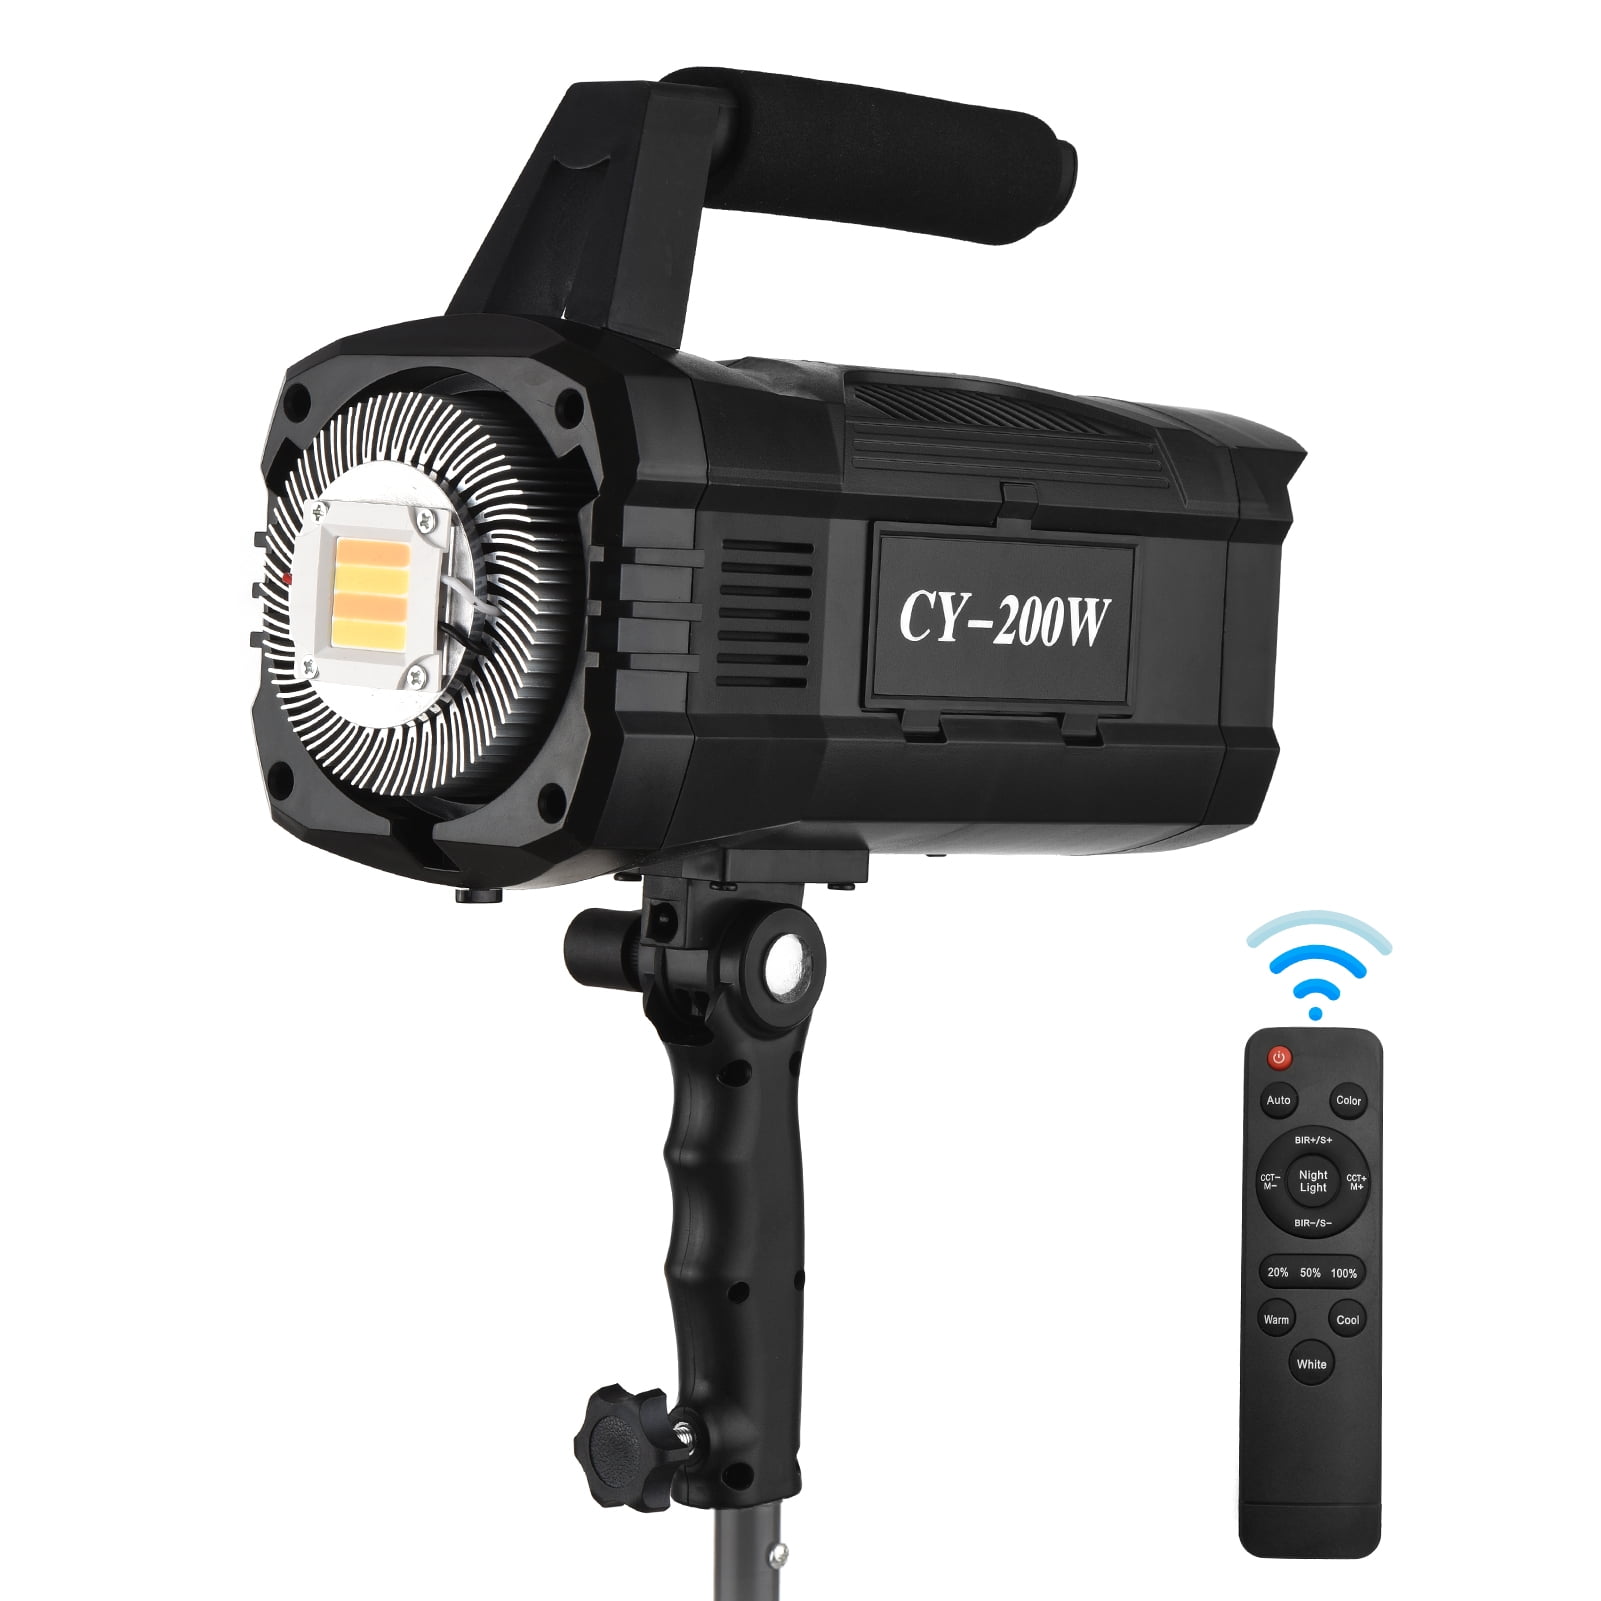 Light Video Lamp for Photo and Video for Sale Online at Good Price